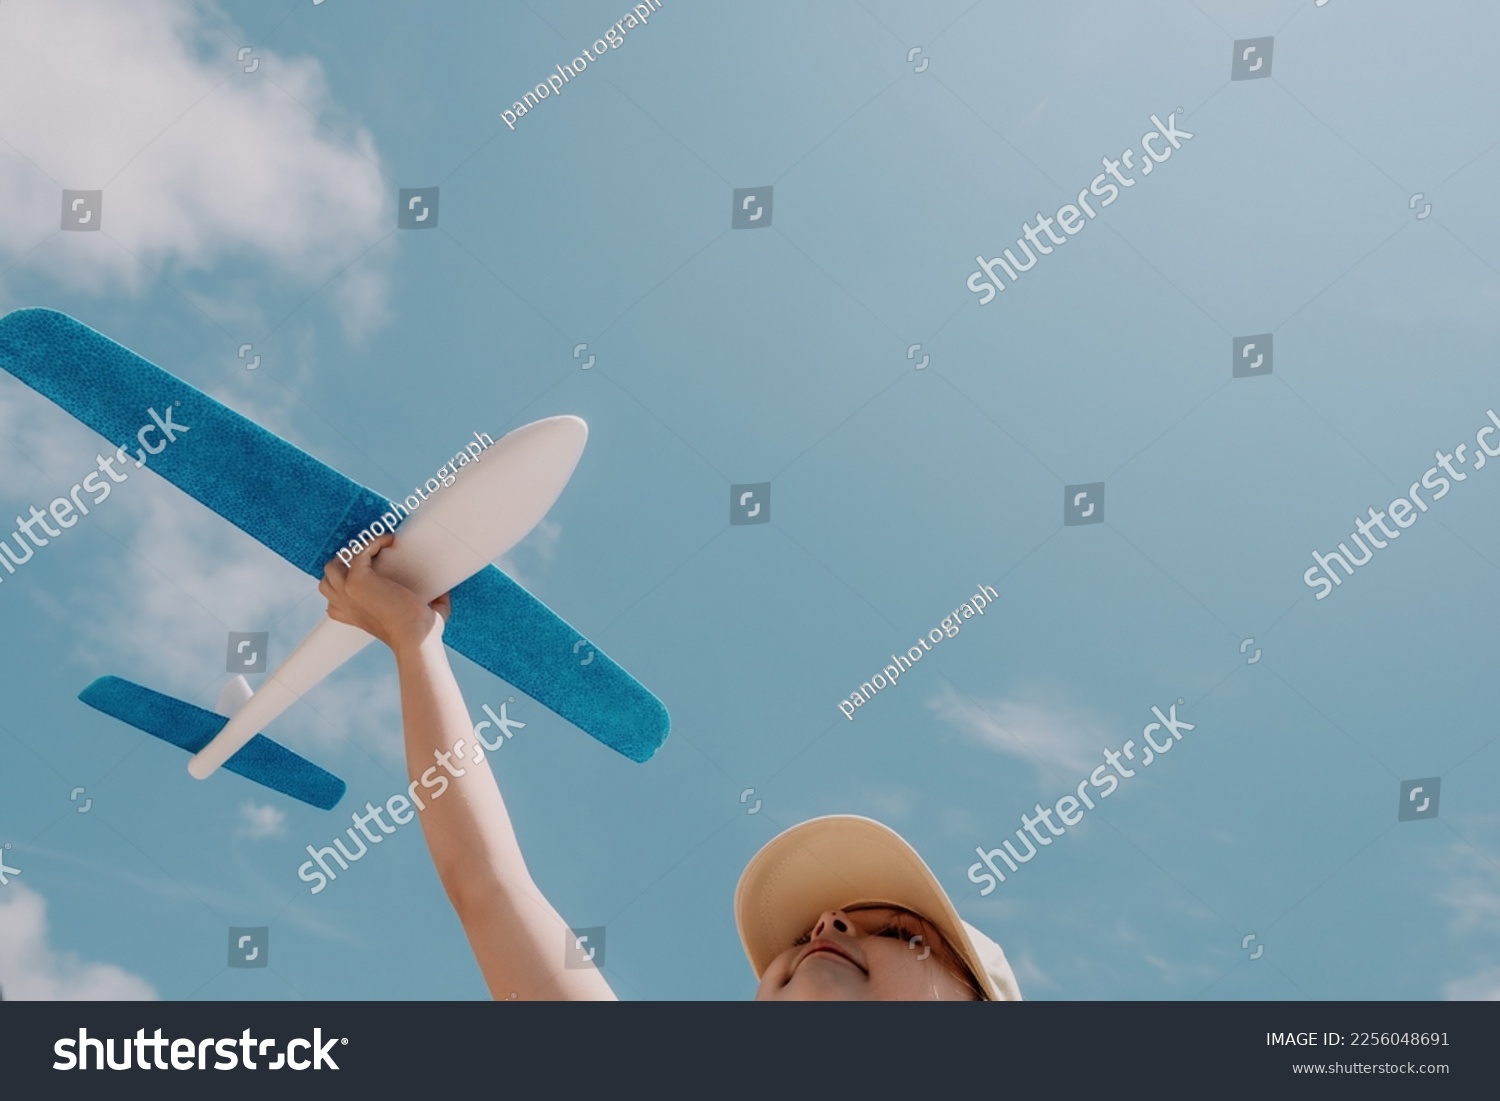 Kid playing with toy airplane. Children dream of travel by plane. Happy child girl has fun in summer vacation by sea and mountains. Outdoors activities at background of blue sky. Lifestyle moment. #2256048691